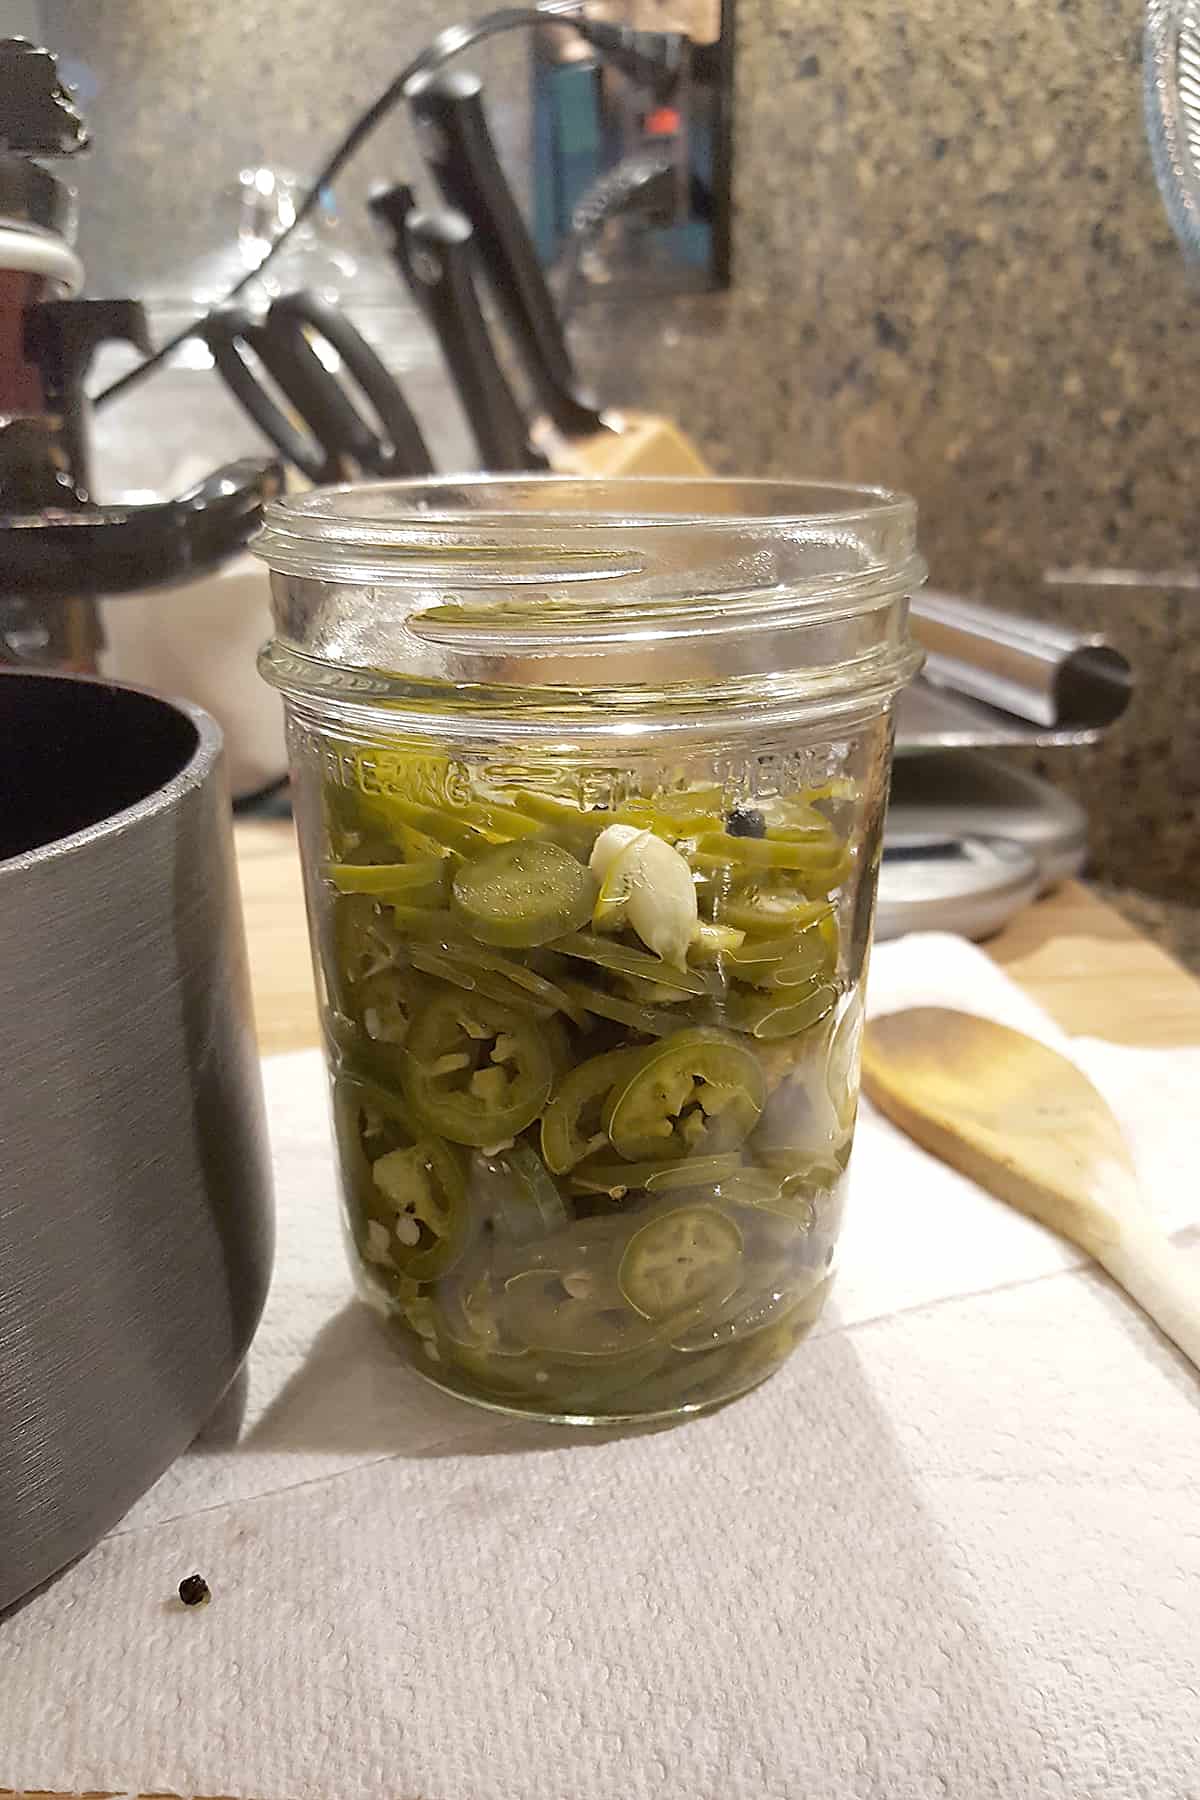 Canning jar containing cooked jalapeno slices and garlic cloves.